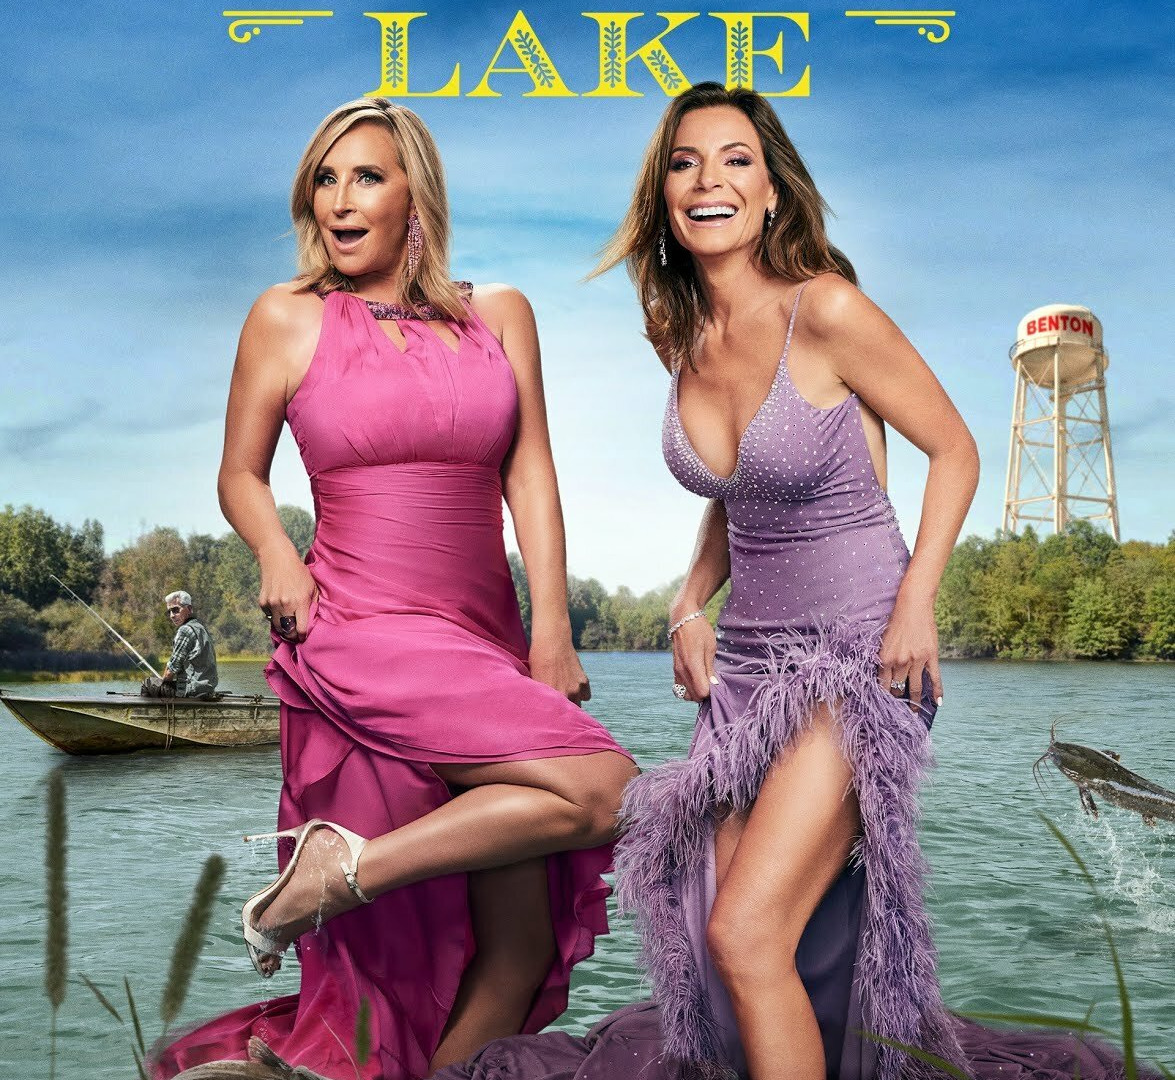 Show Luann and Sonja: Welcome to Crappie Lake